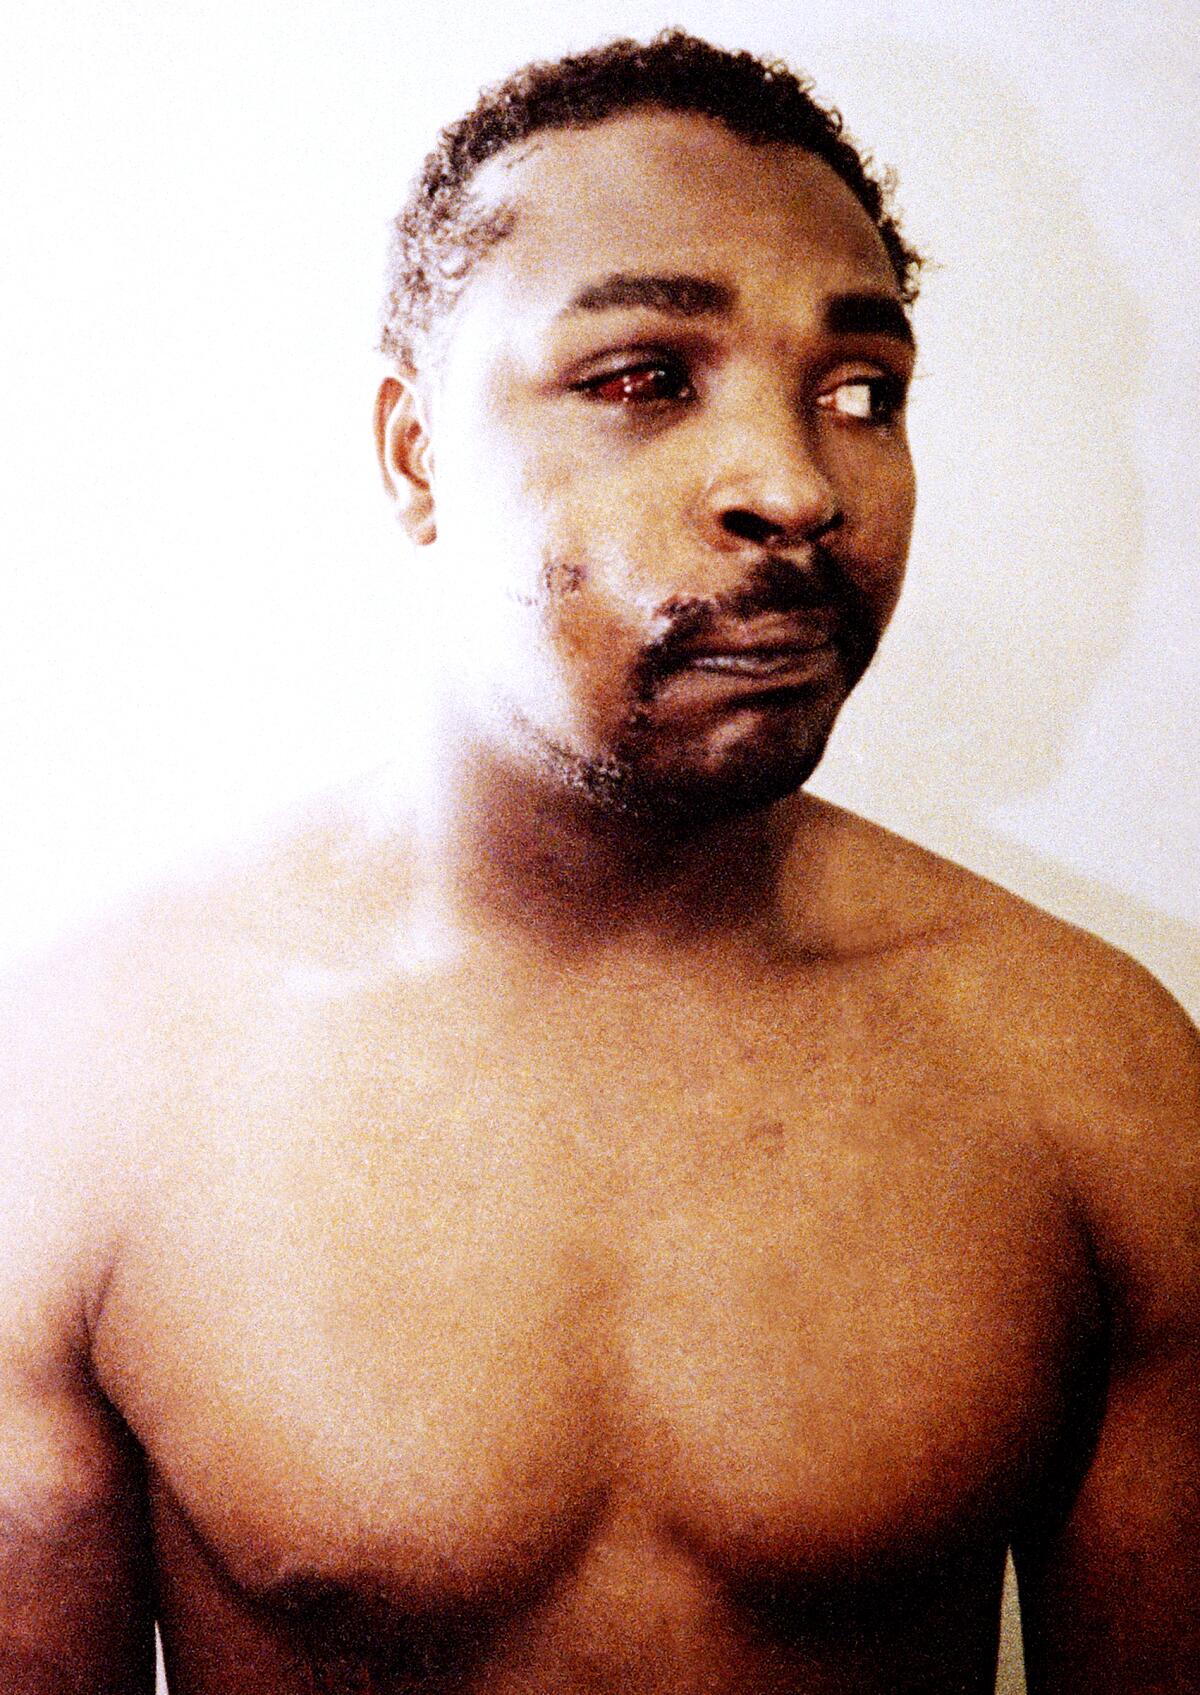 This file photo of Rodney King was taken three days after his videotaped beating